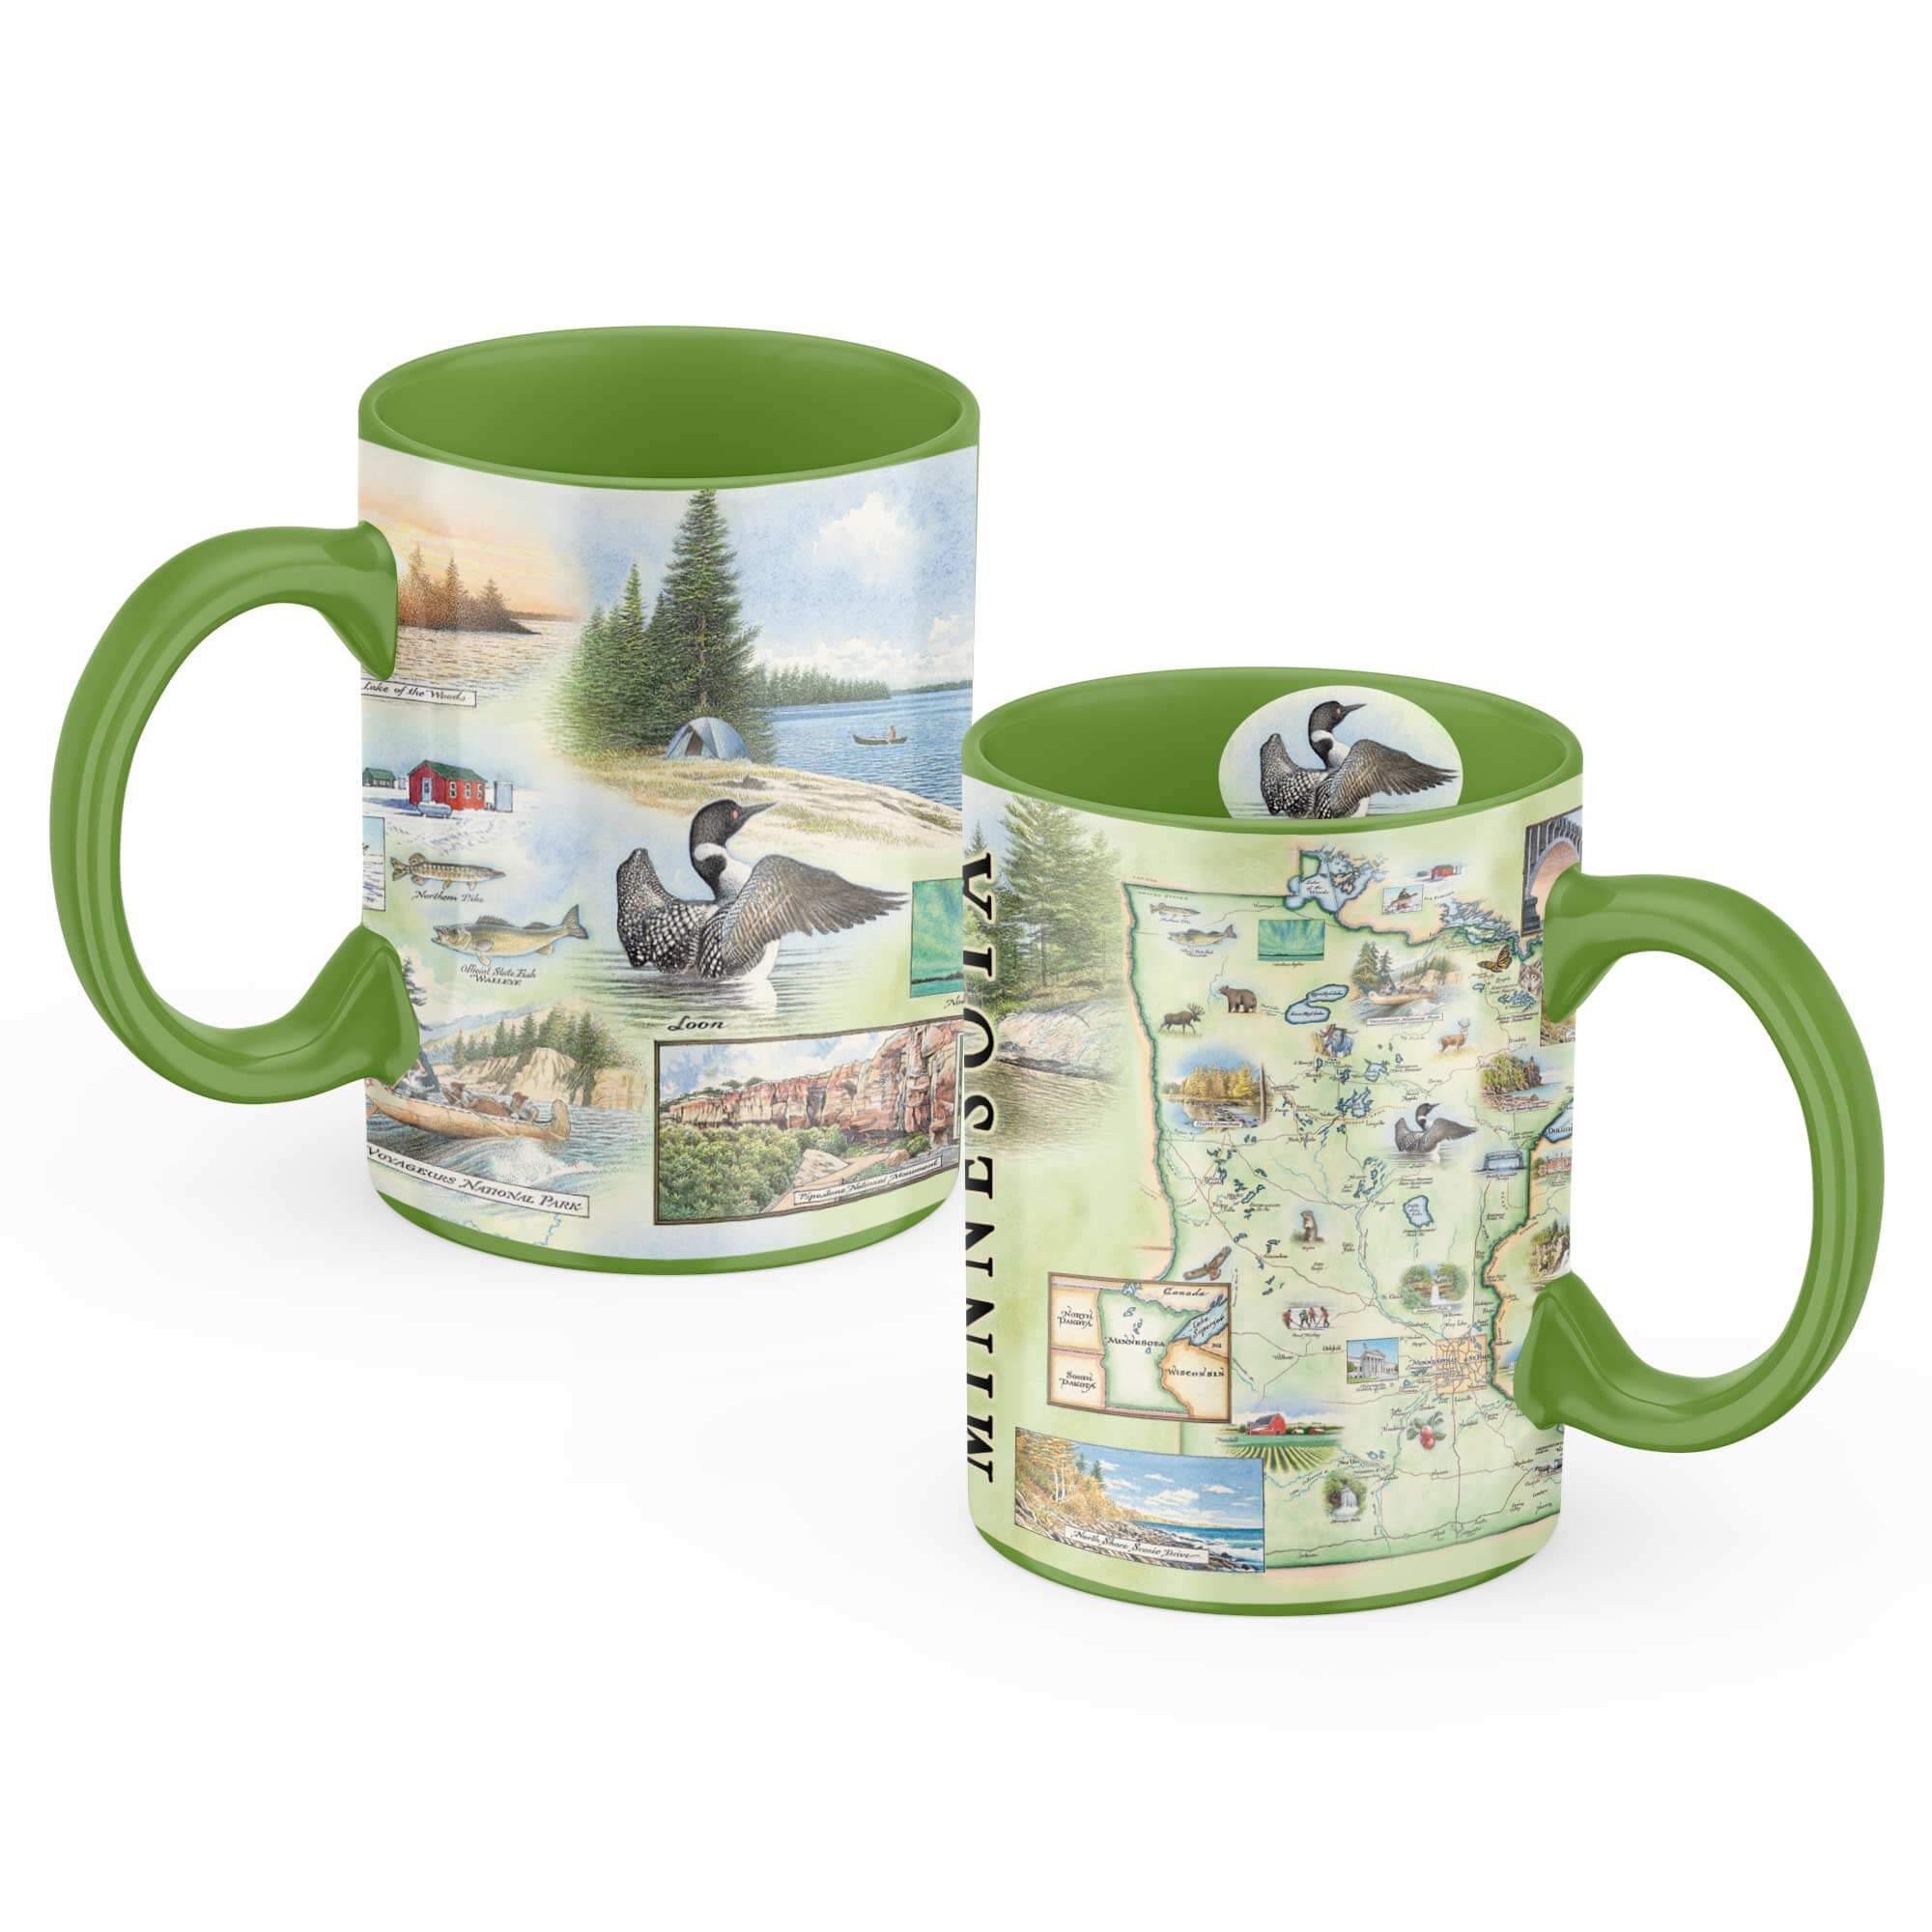 Sip your favorite beverage in style with this Minnesota map ceramic mug. Featuring illustrations of popular attractions such as Featuring a detailed map adorned with illustrations of canoes, wolves, elk, bears, birds, and fish, alongside iconic landmarks like Minneapolis, Prince, St. Paul, and other popular attractions, it's the perfect way to stay cozy while celebrating the beauty of the North Star State.